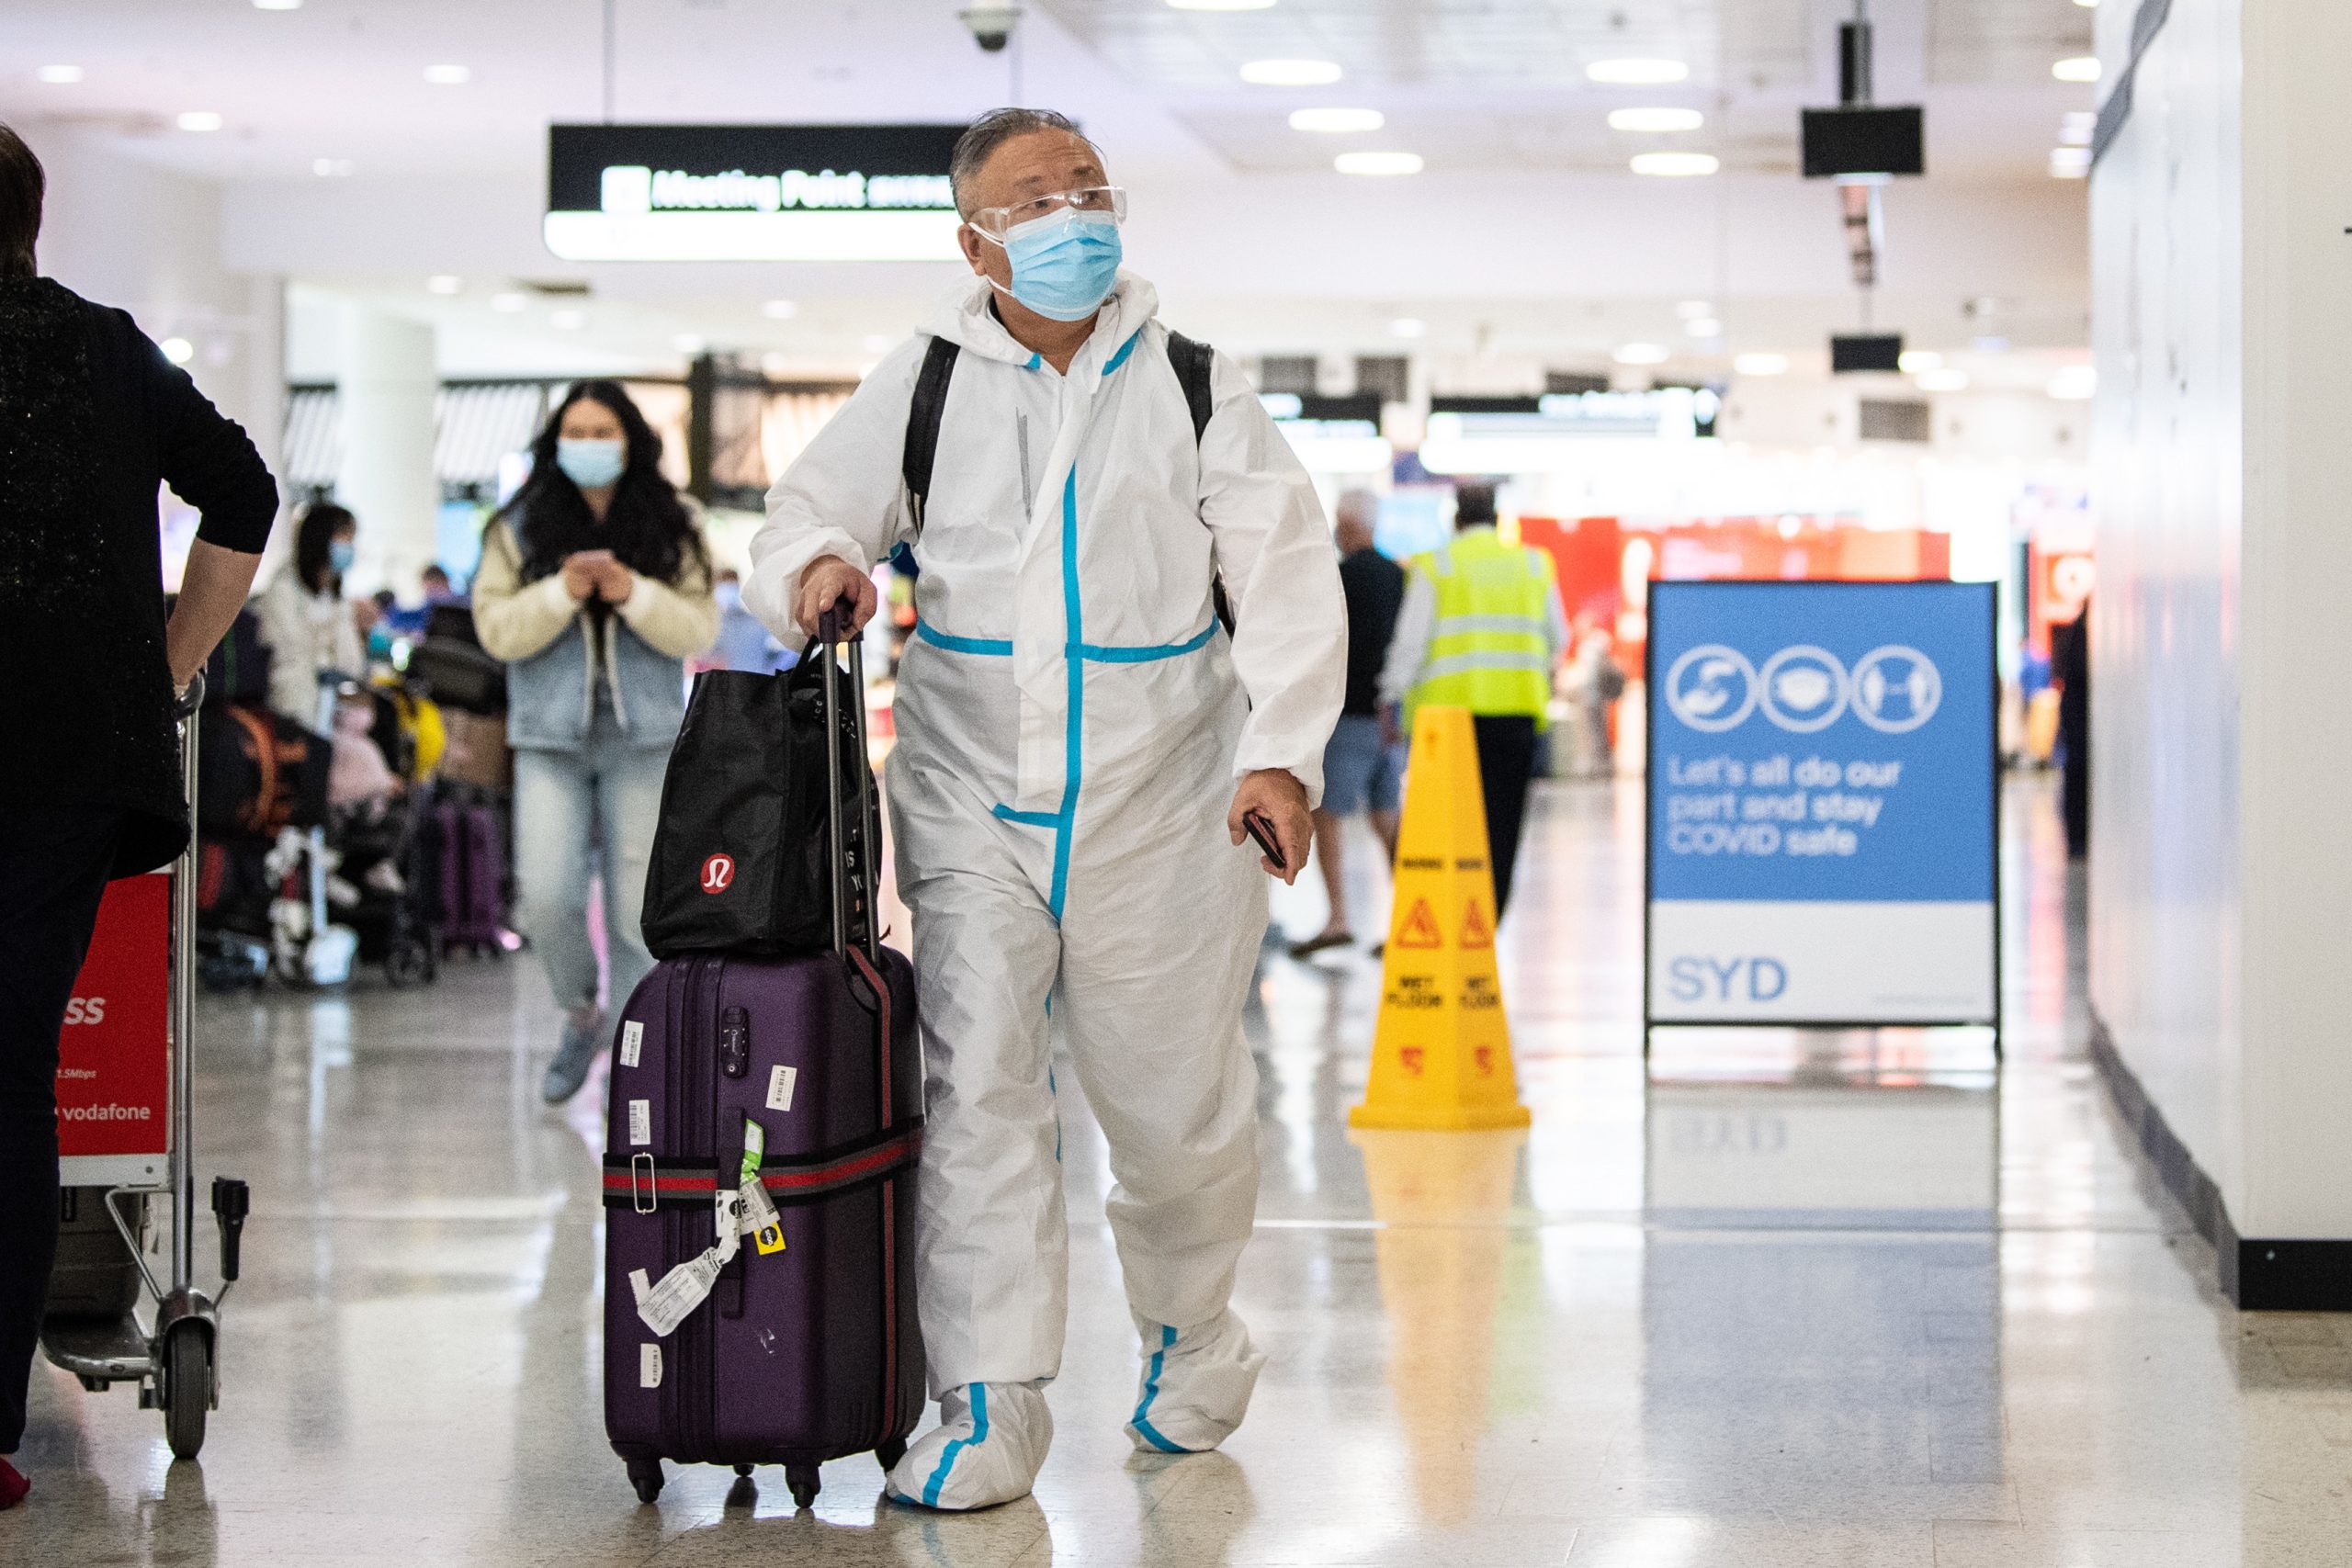 epa09610680 Travelers wearing personal protective equipment (PPE) arrive at Sydney International Airport in Sydney, New South Wales (NSW), Australia, 29 November 2021. The Omicron variant of SARS-CoV-2, the virus that causes COVID-19, has arrived in Australia after testing confirmed two overseas travellers who arrived in Sydney were infected with the new strain.  EPA/JAMES GOURLEY  AUSTRALIA AND NEW ZEALAND OUT